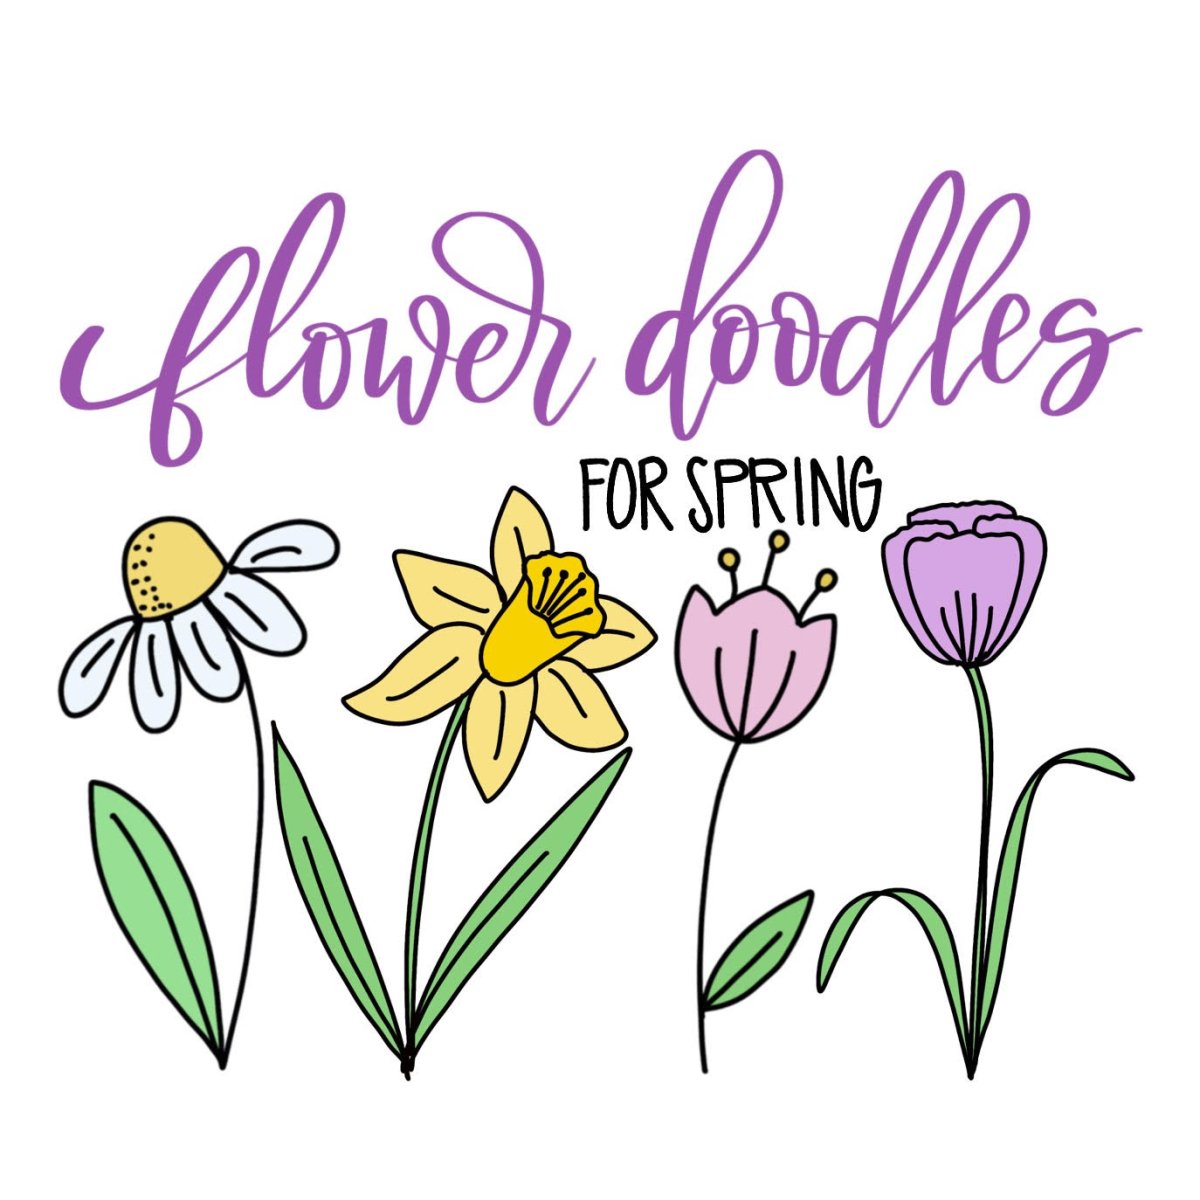 5 Flower Doodles for Spring - Amy Latta Creations